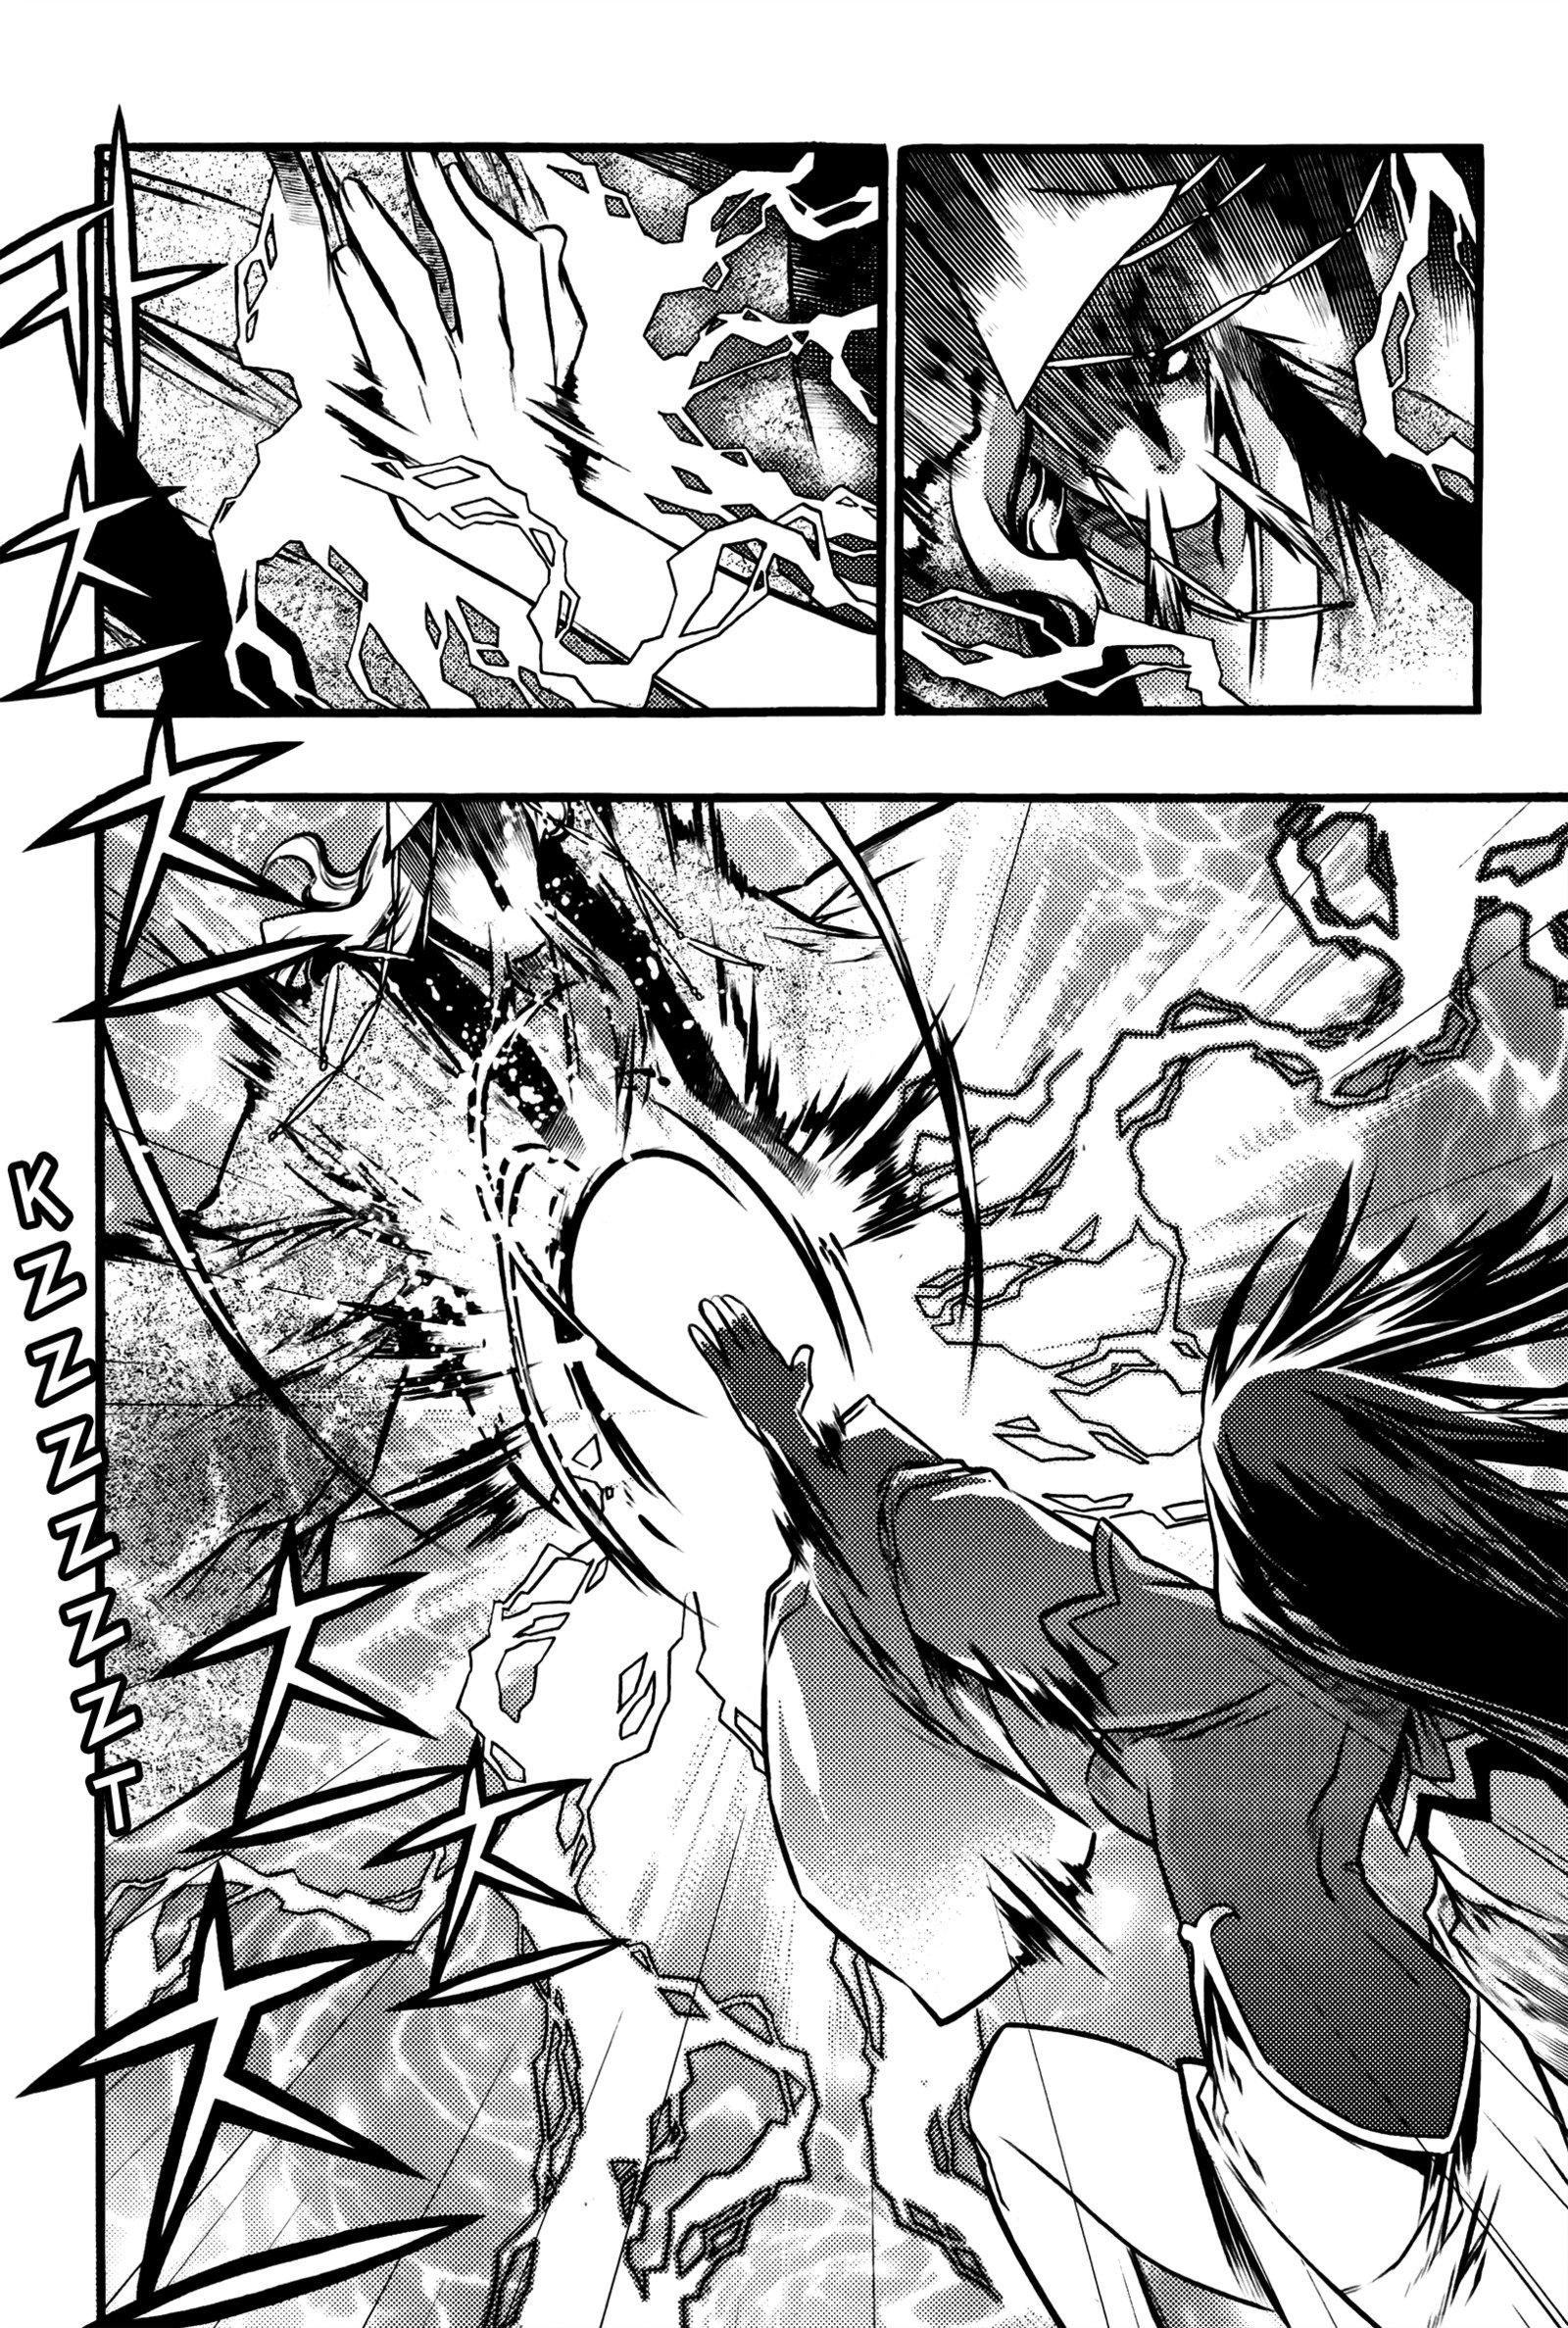 Chronicles of the Cursed Sword vol.27 ch.104